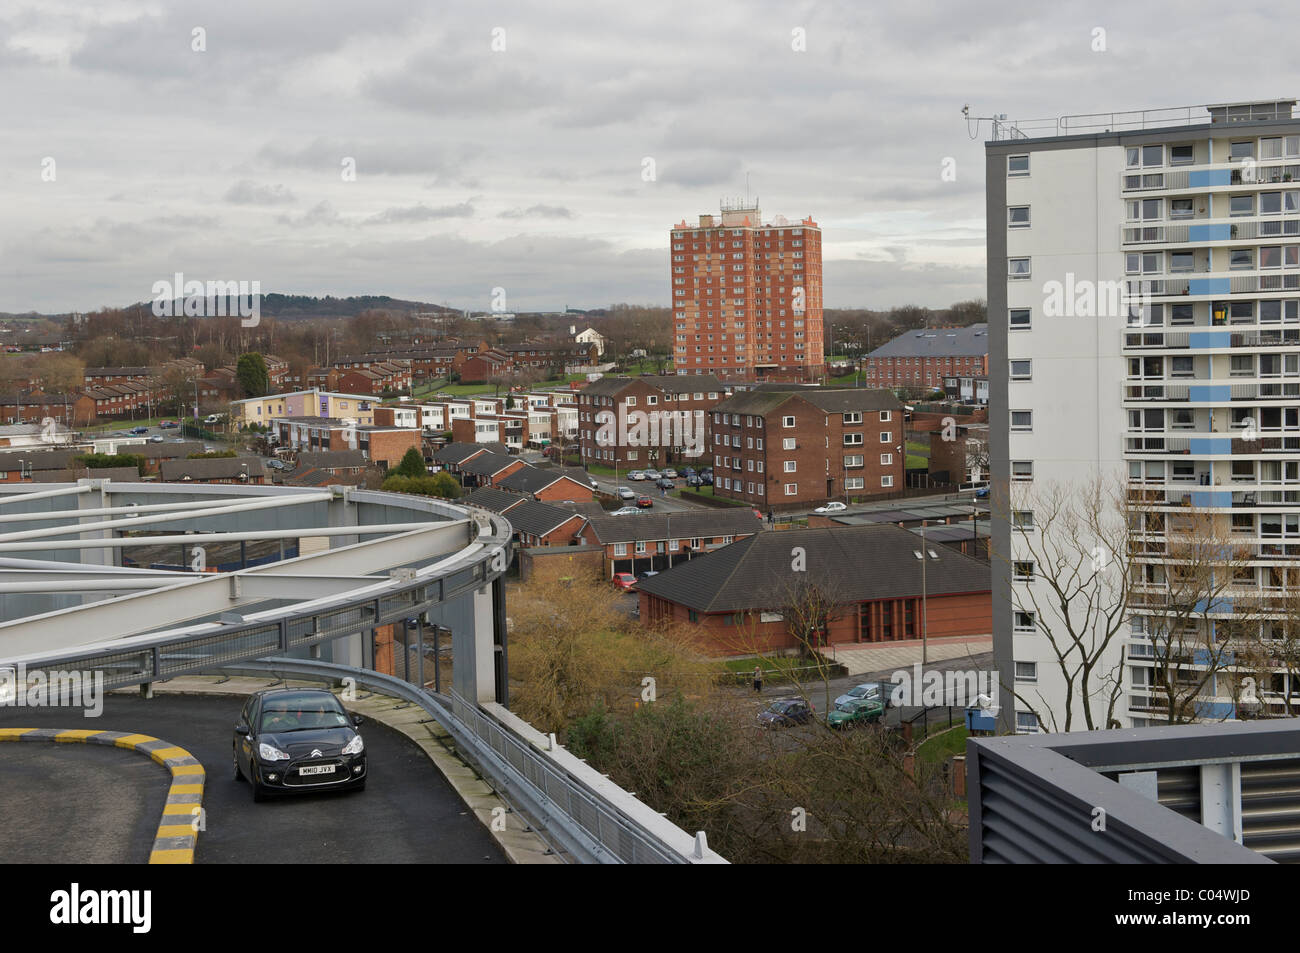 Wigan town centre car park and housing Stock Photo